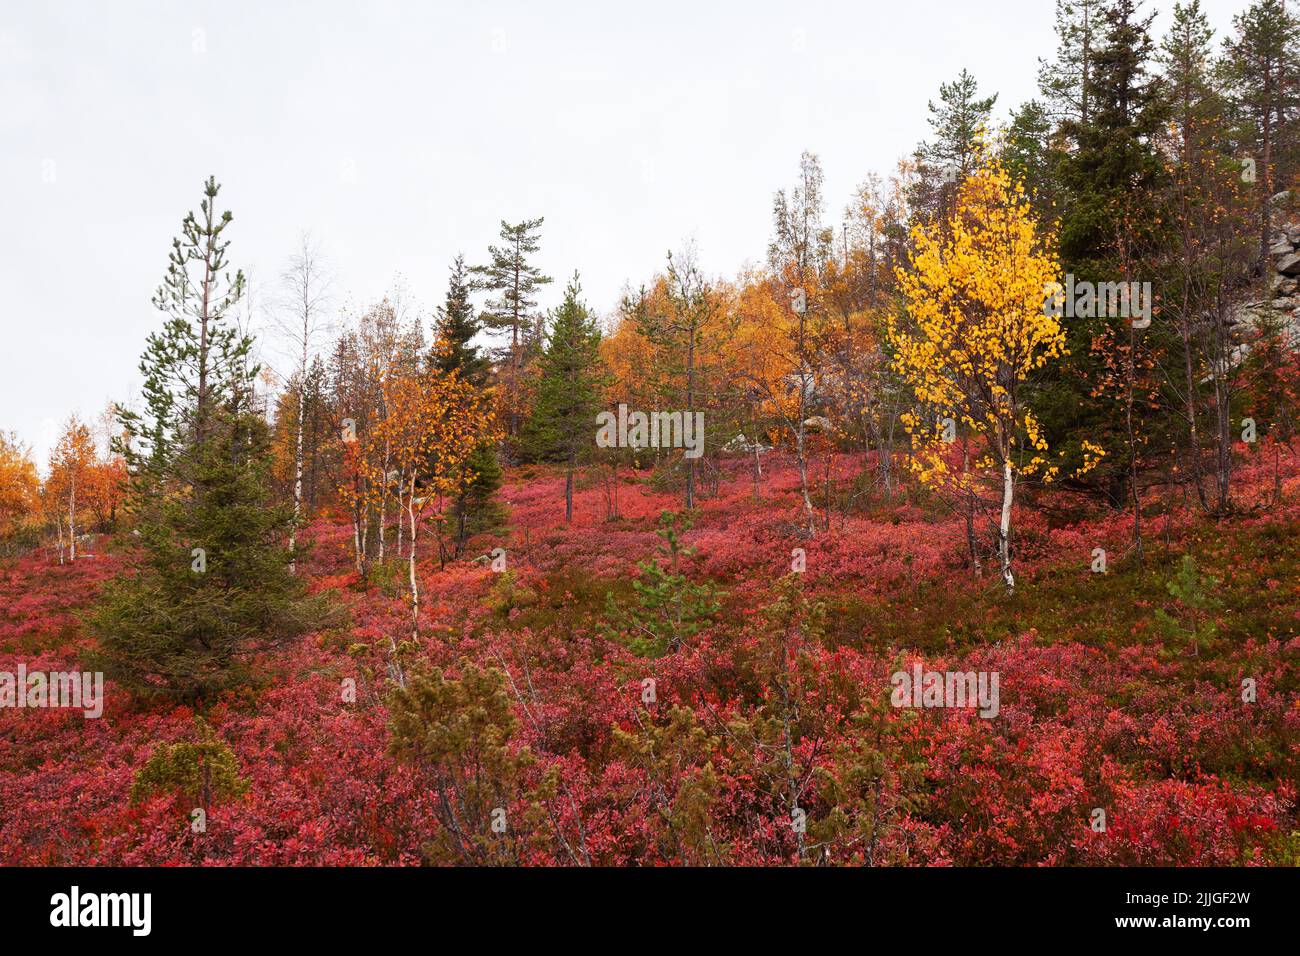 An autumnal old-growth taiga forest with colorful forest floor during fall foliage in Northern Finland near Salla. Stock Photo